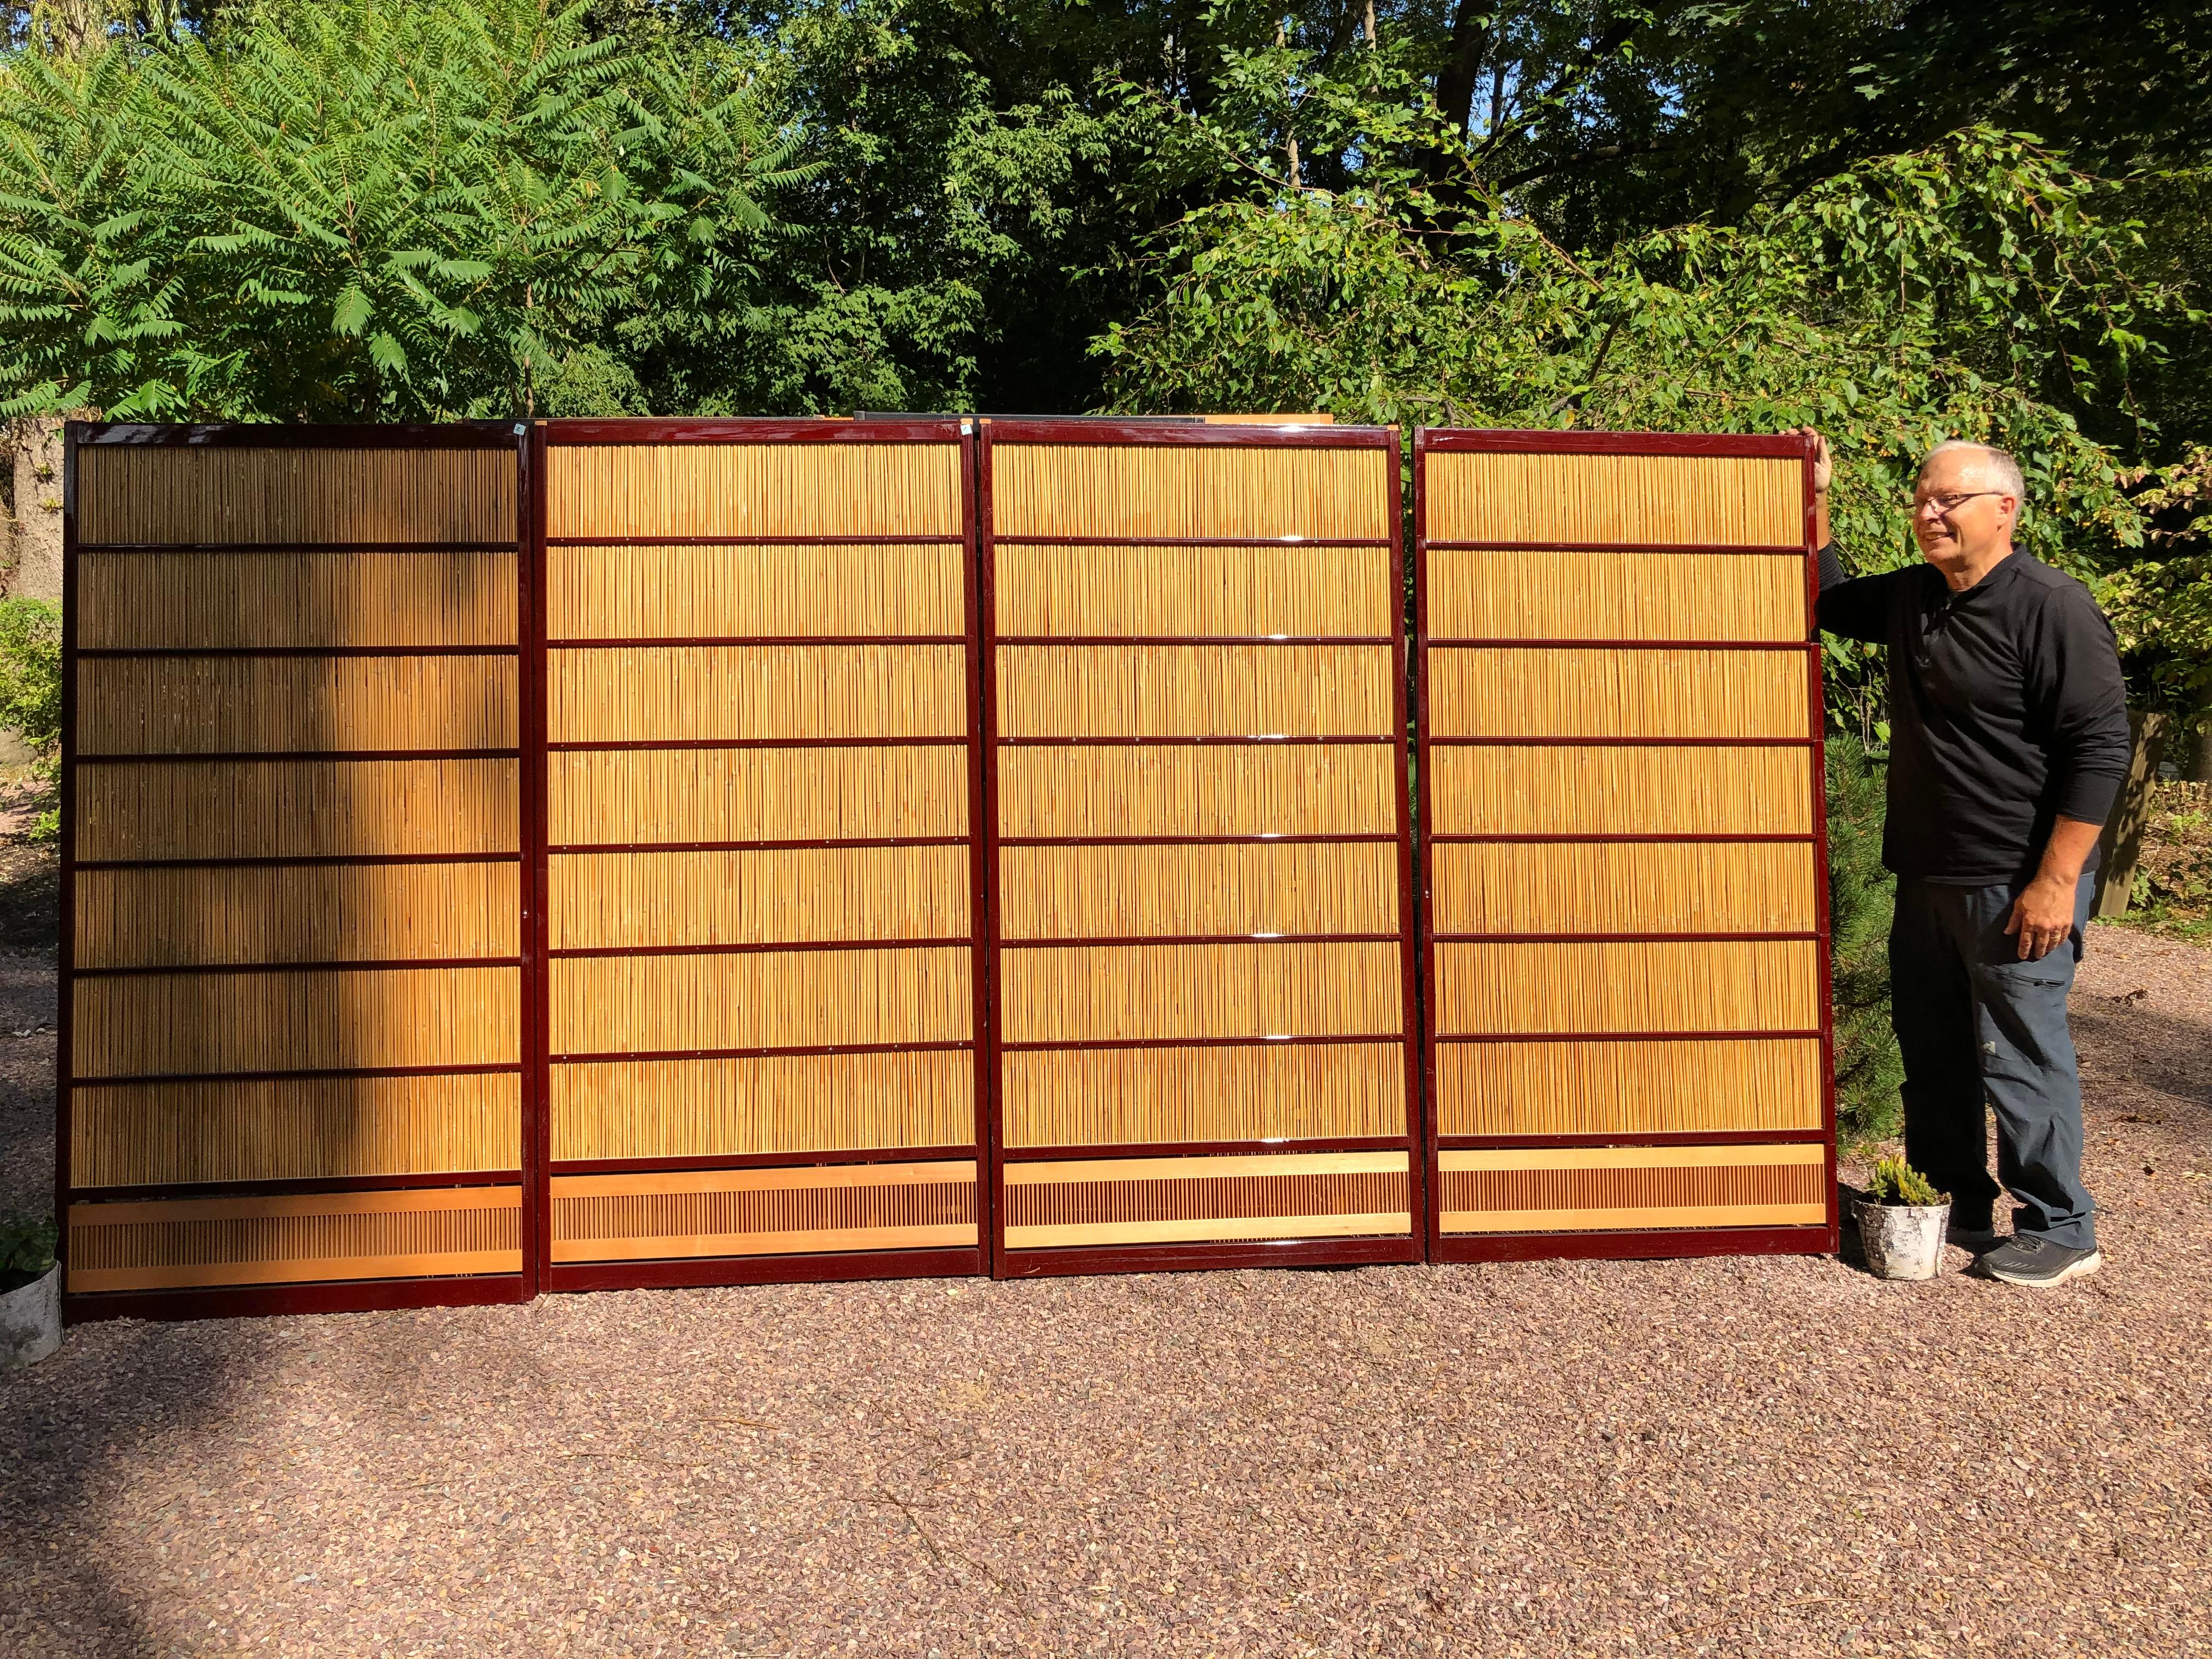 Japan, a fine set of four shoji red lacquer bamboo doors or screens recently acquired from a Japanese private collector. The hand carved bottom boards are artistically cut with vertical pattern and inserted as decorative borders.

Lovely examples